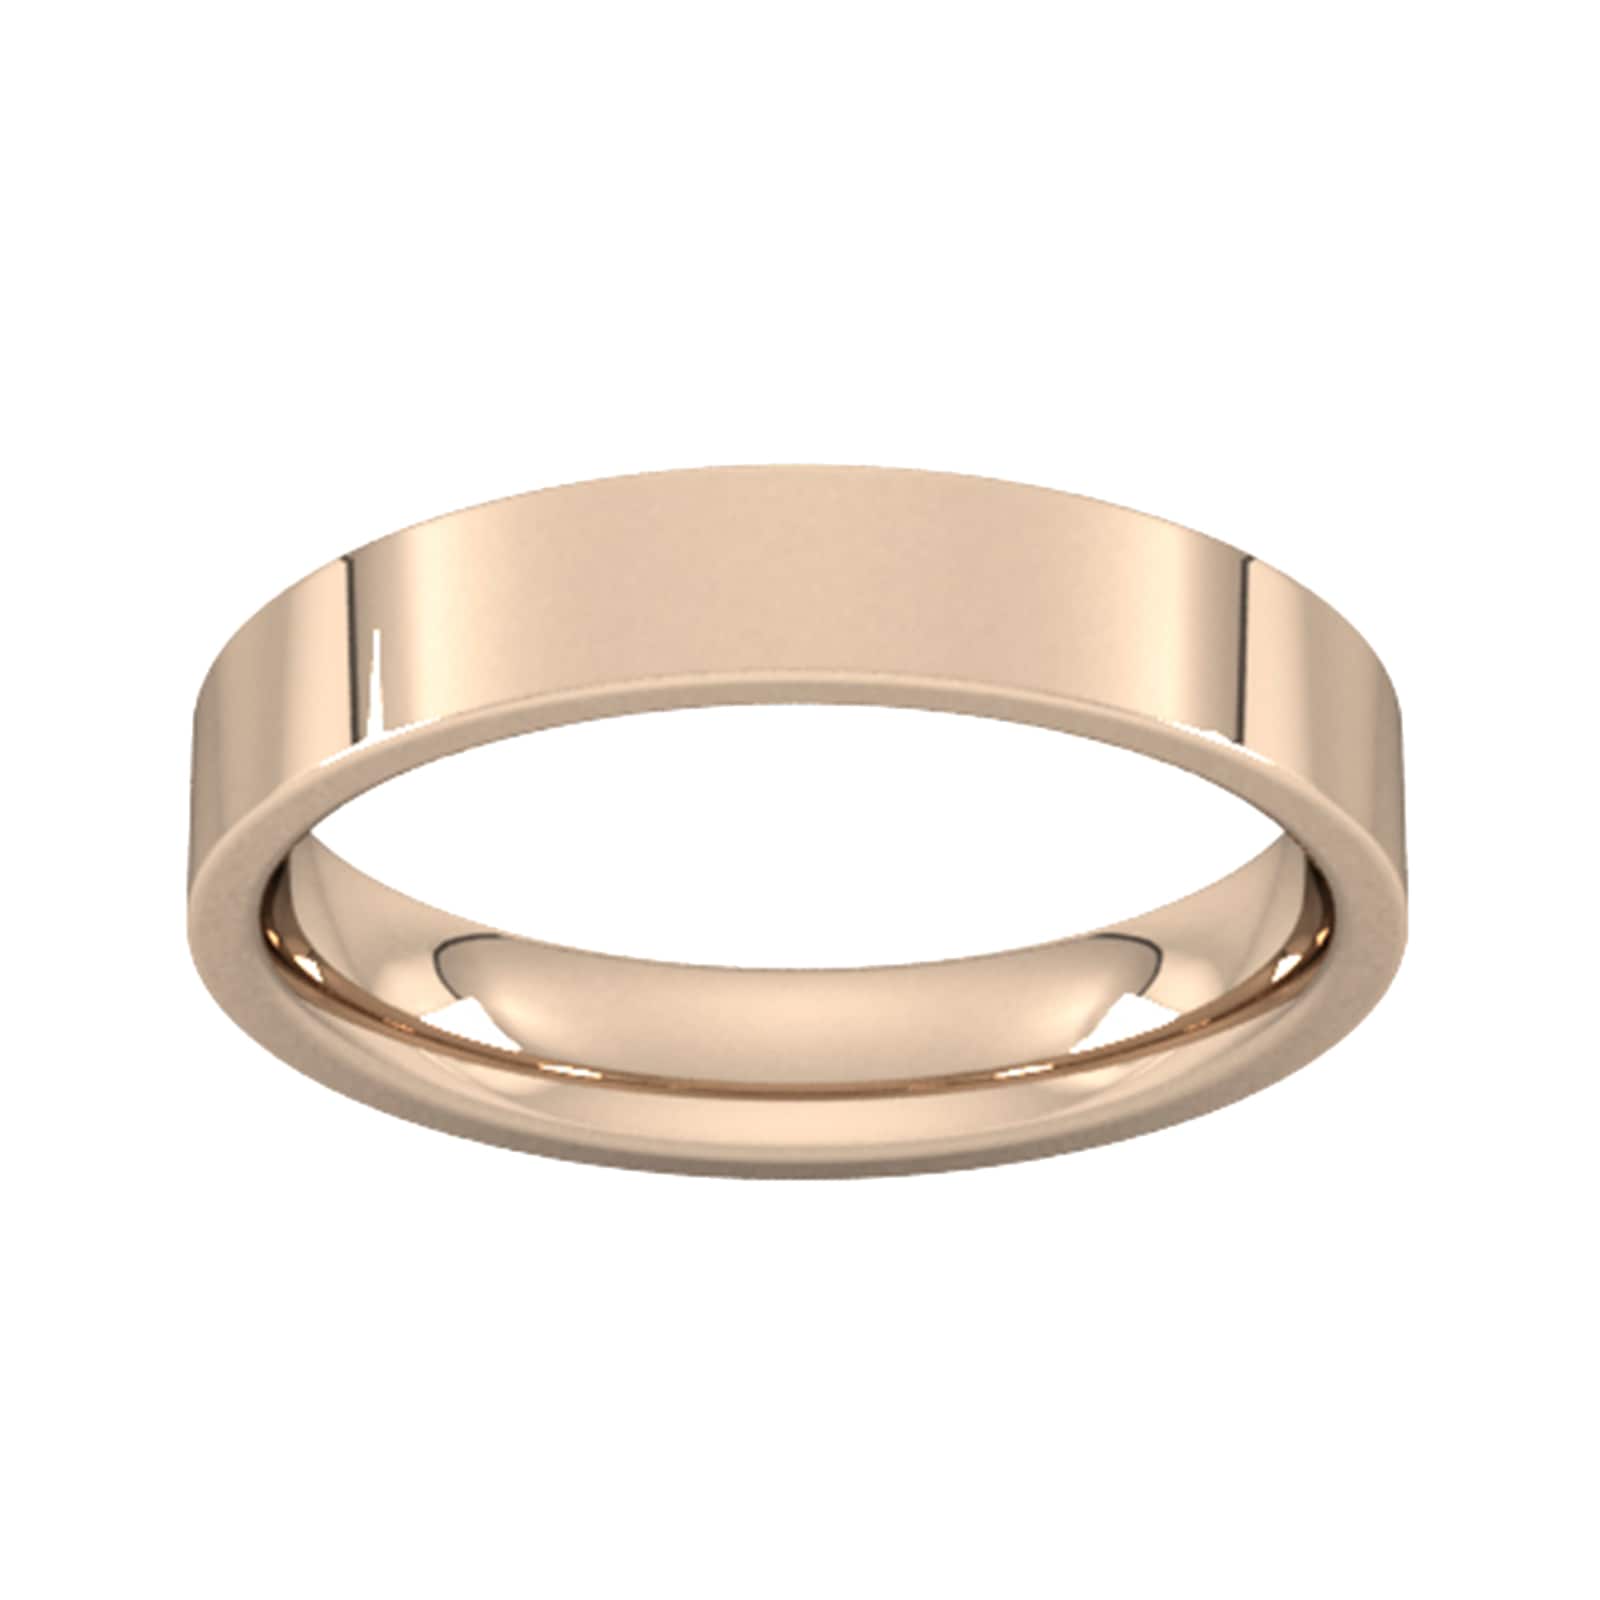 4mm Flat Court Heavy Wedding Ring In 18 Carat Rose Gold - Ring Size O